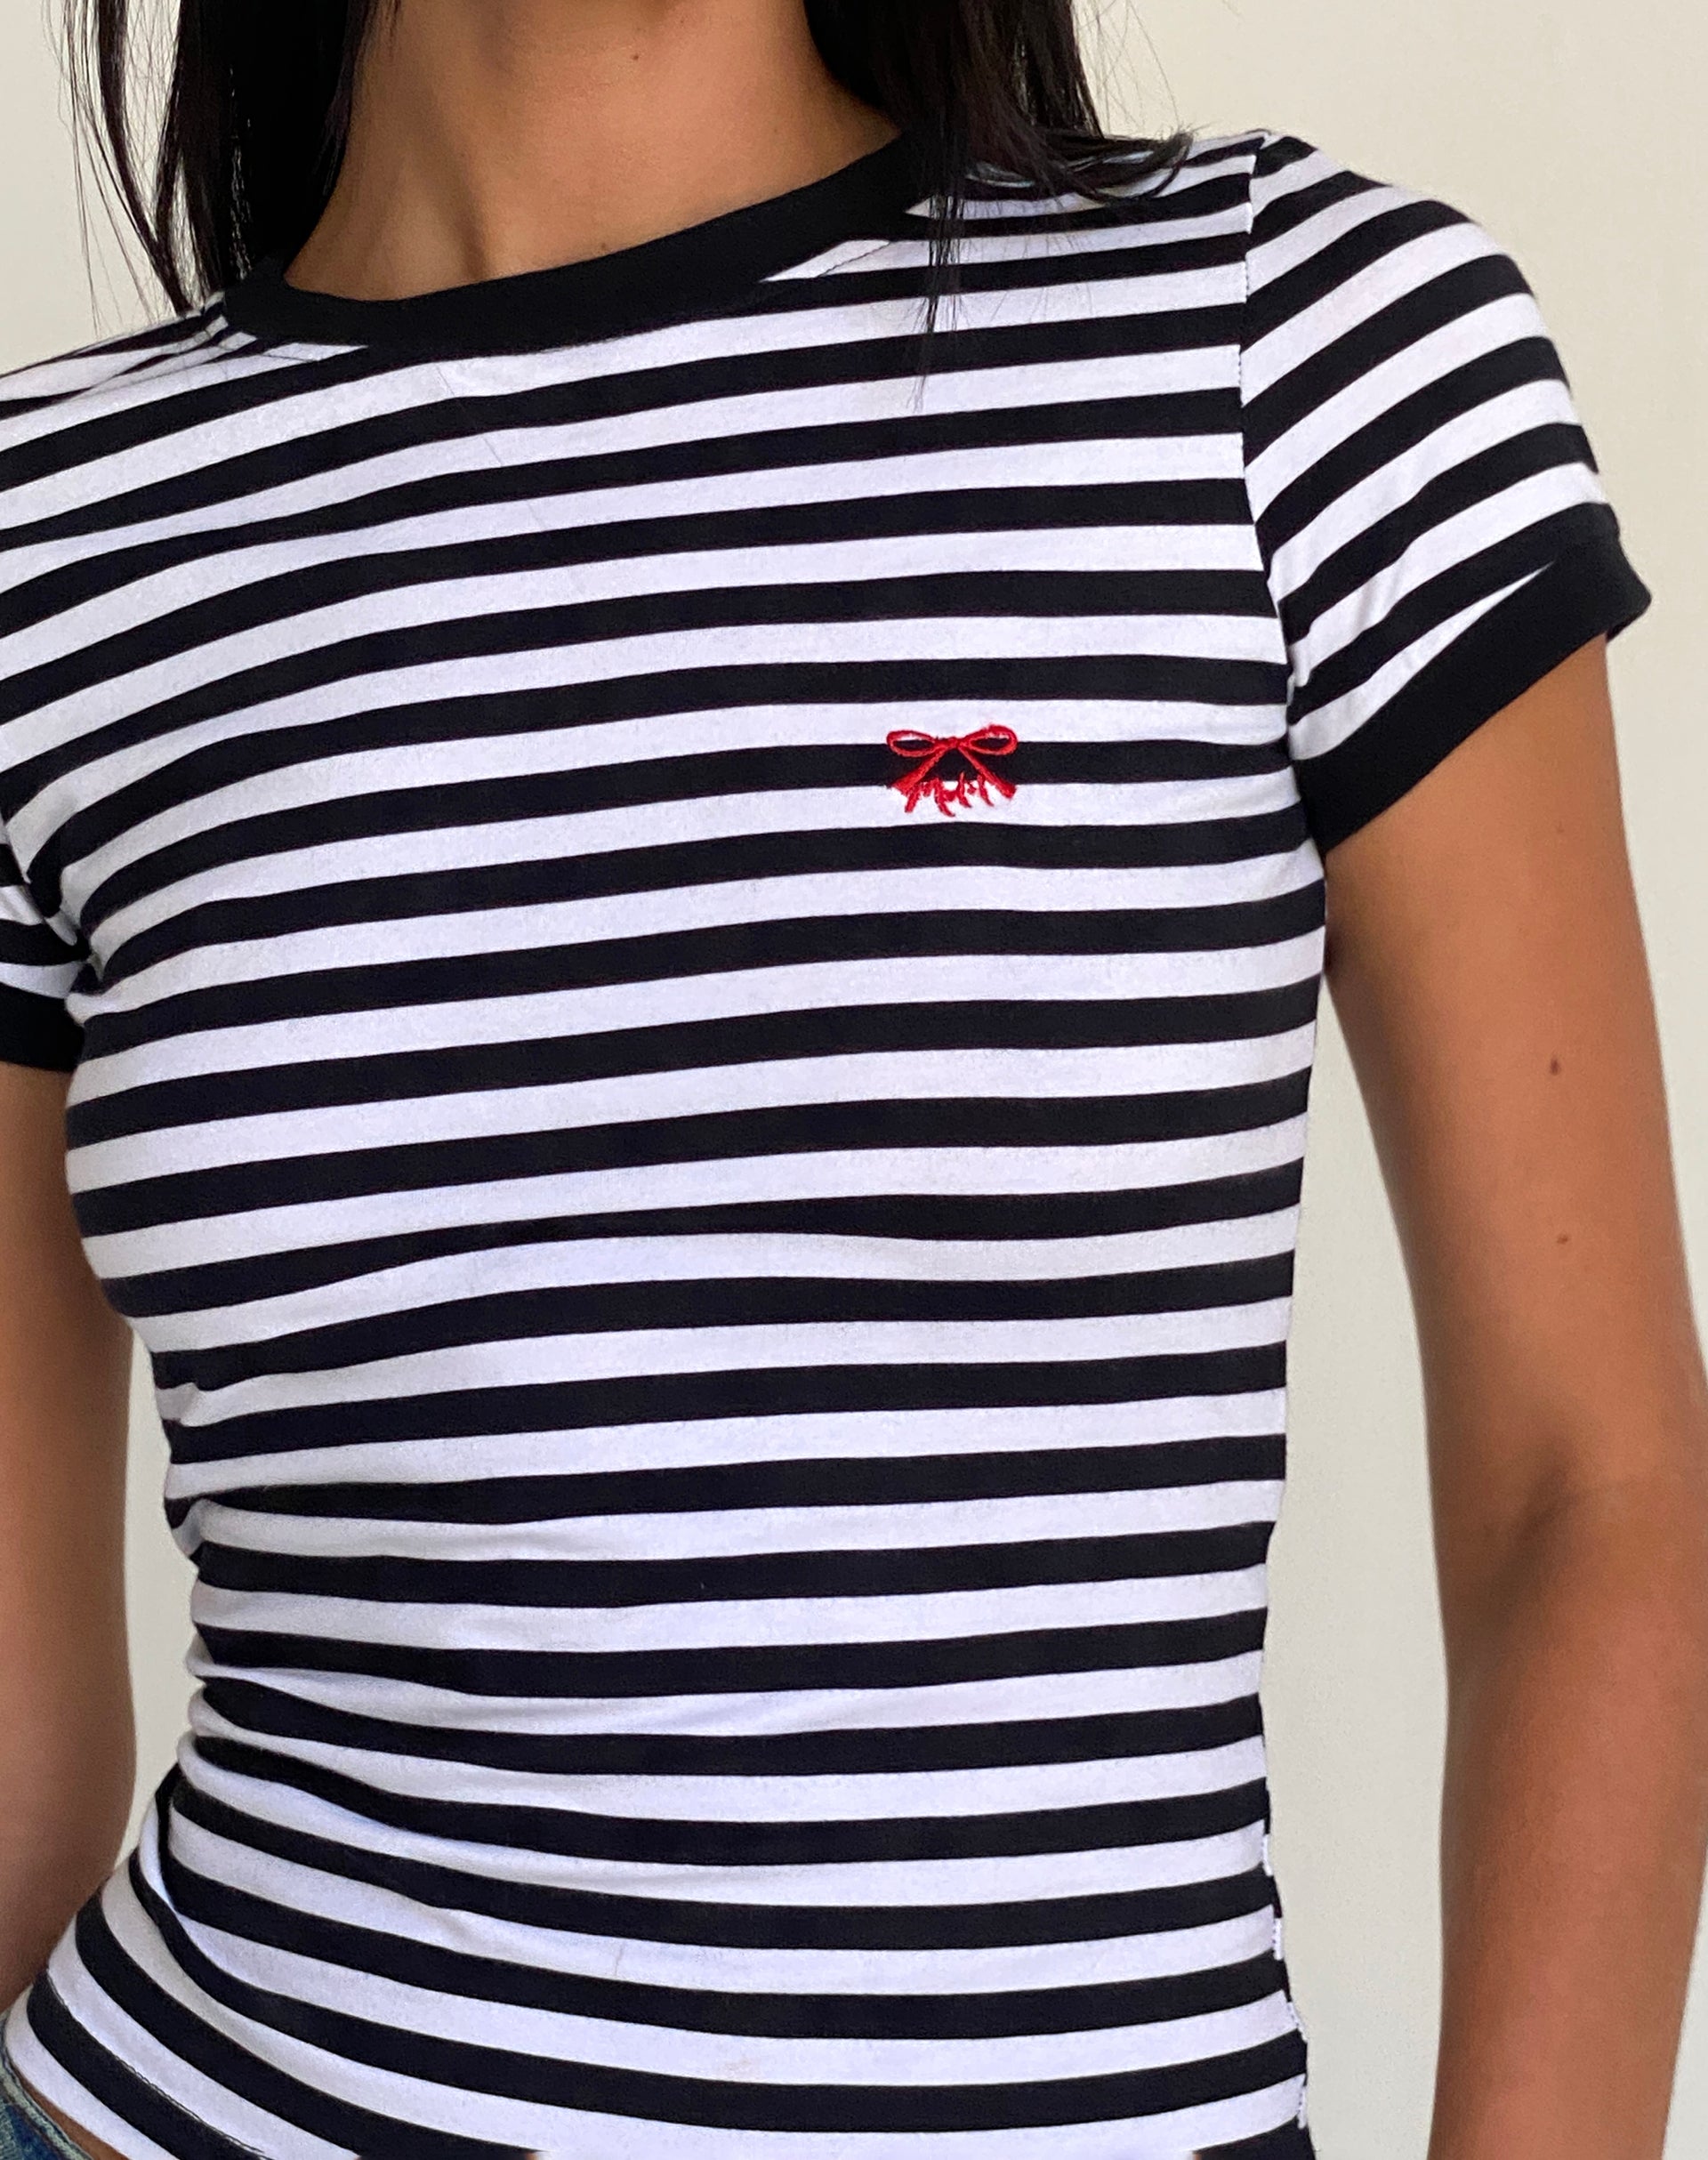 Sutin Tee in Black and White Stripe with M Embro